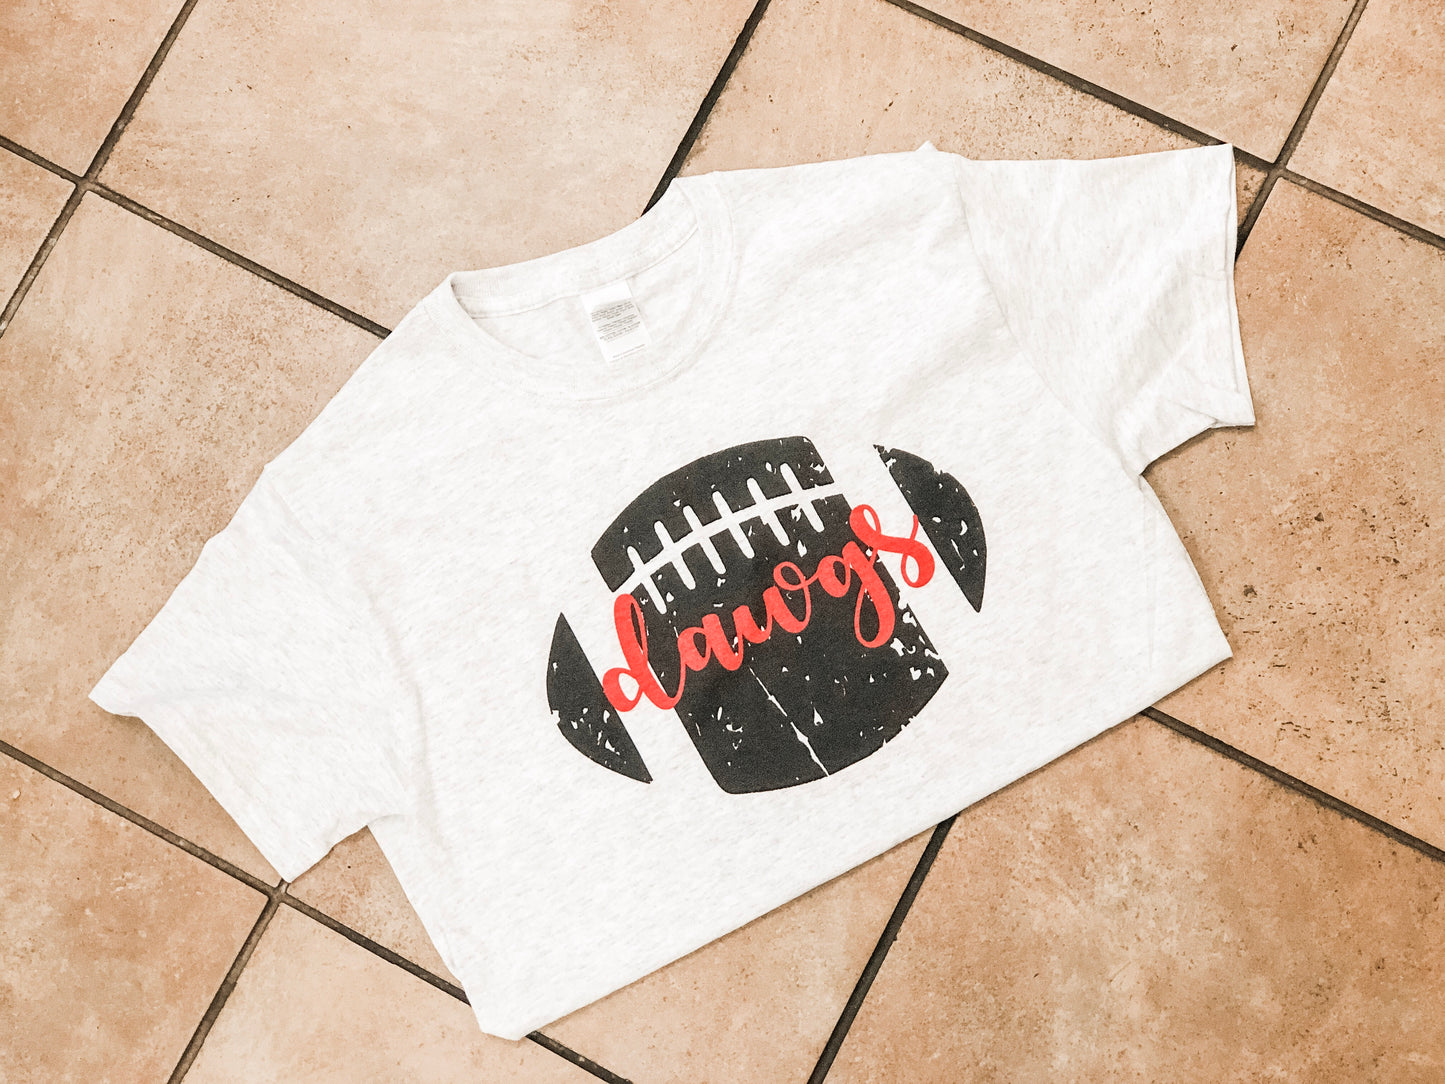 Distressed Football Tee with Team Name - White Short-Sleeve Tee - Southern Grace Creations